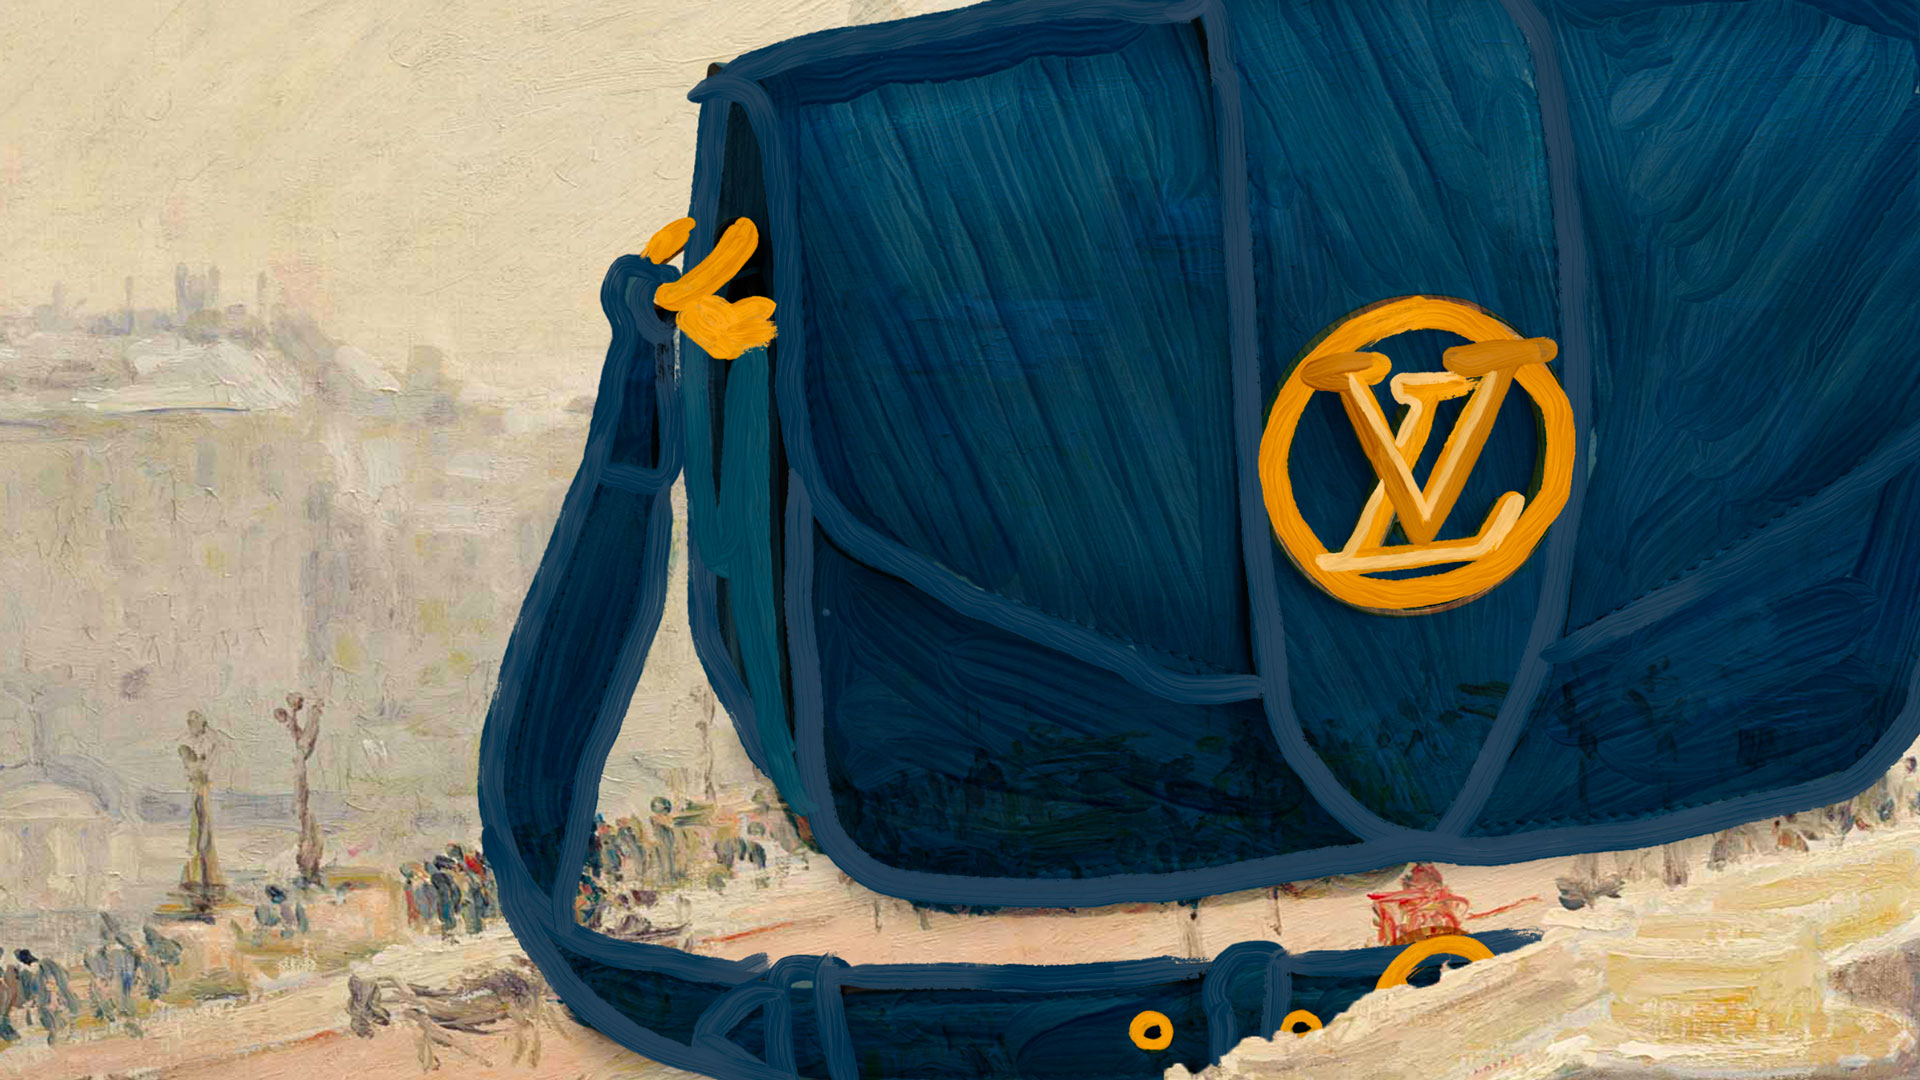 Meet the LV Pont 9: Louis Vuitton's Key Bag of 2020 Launches in